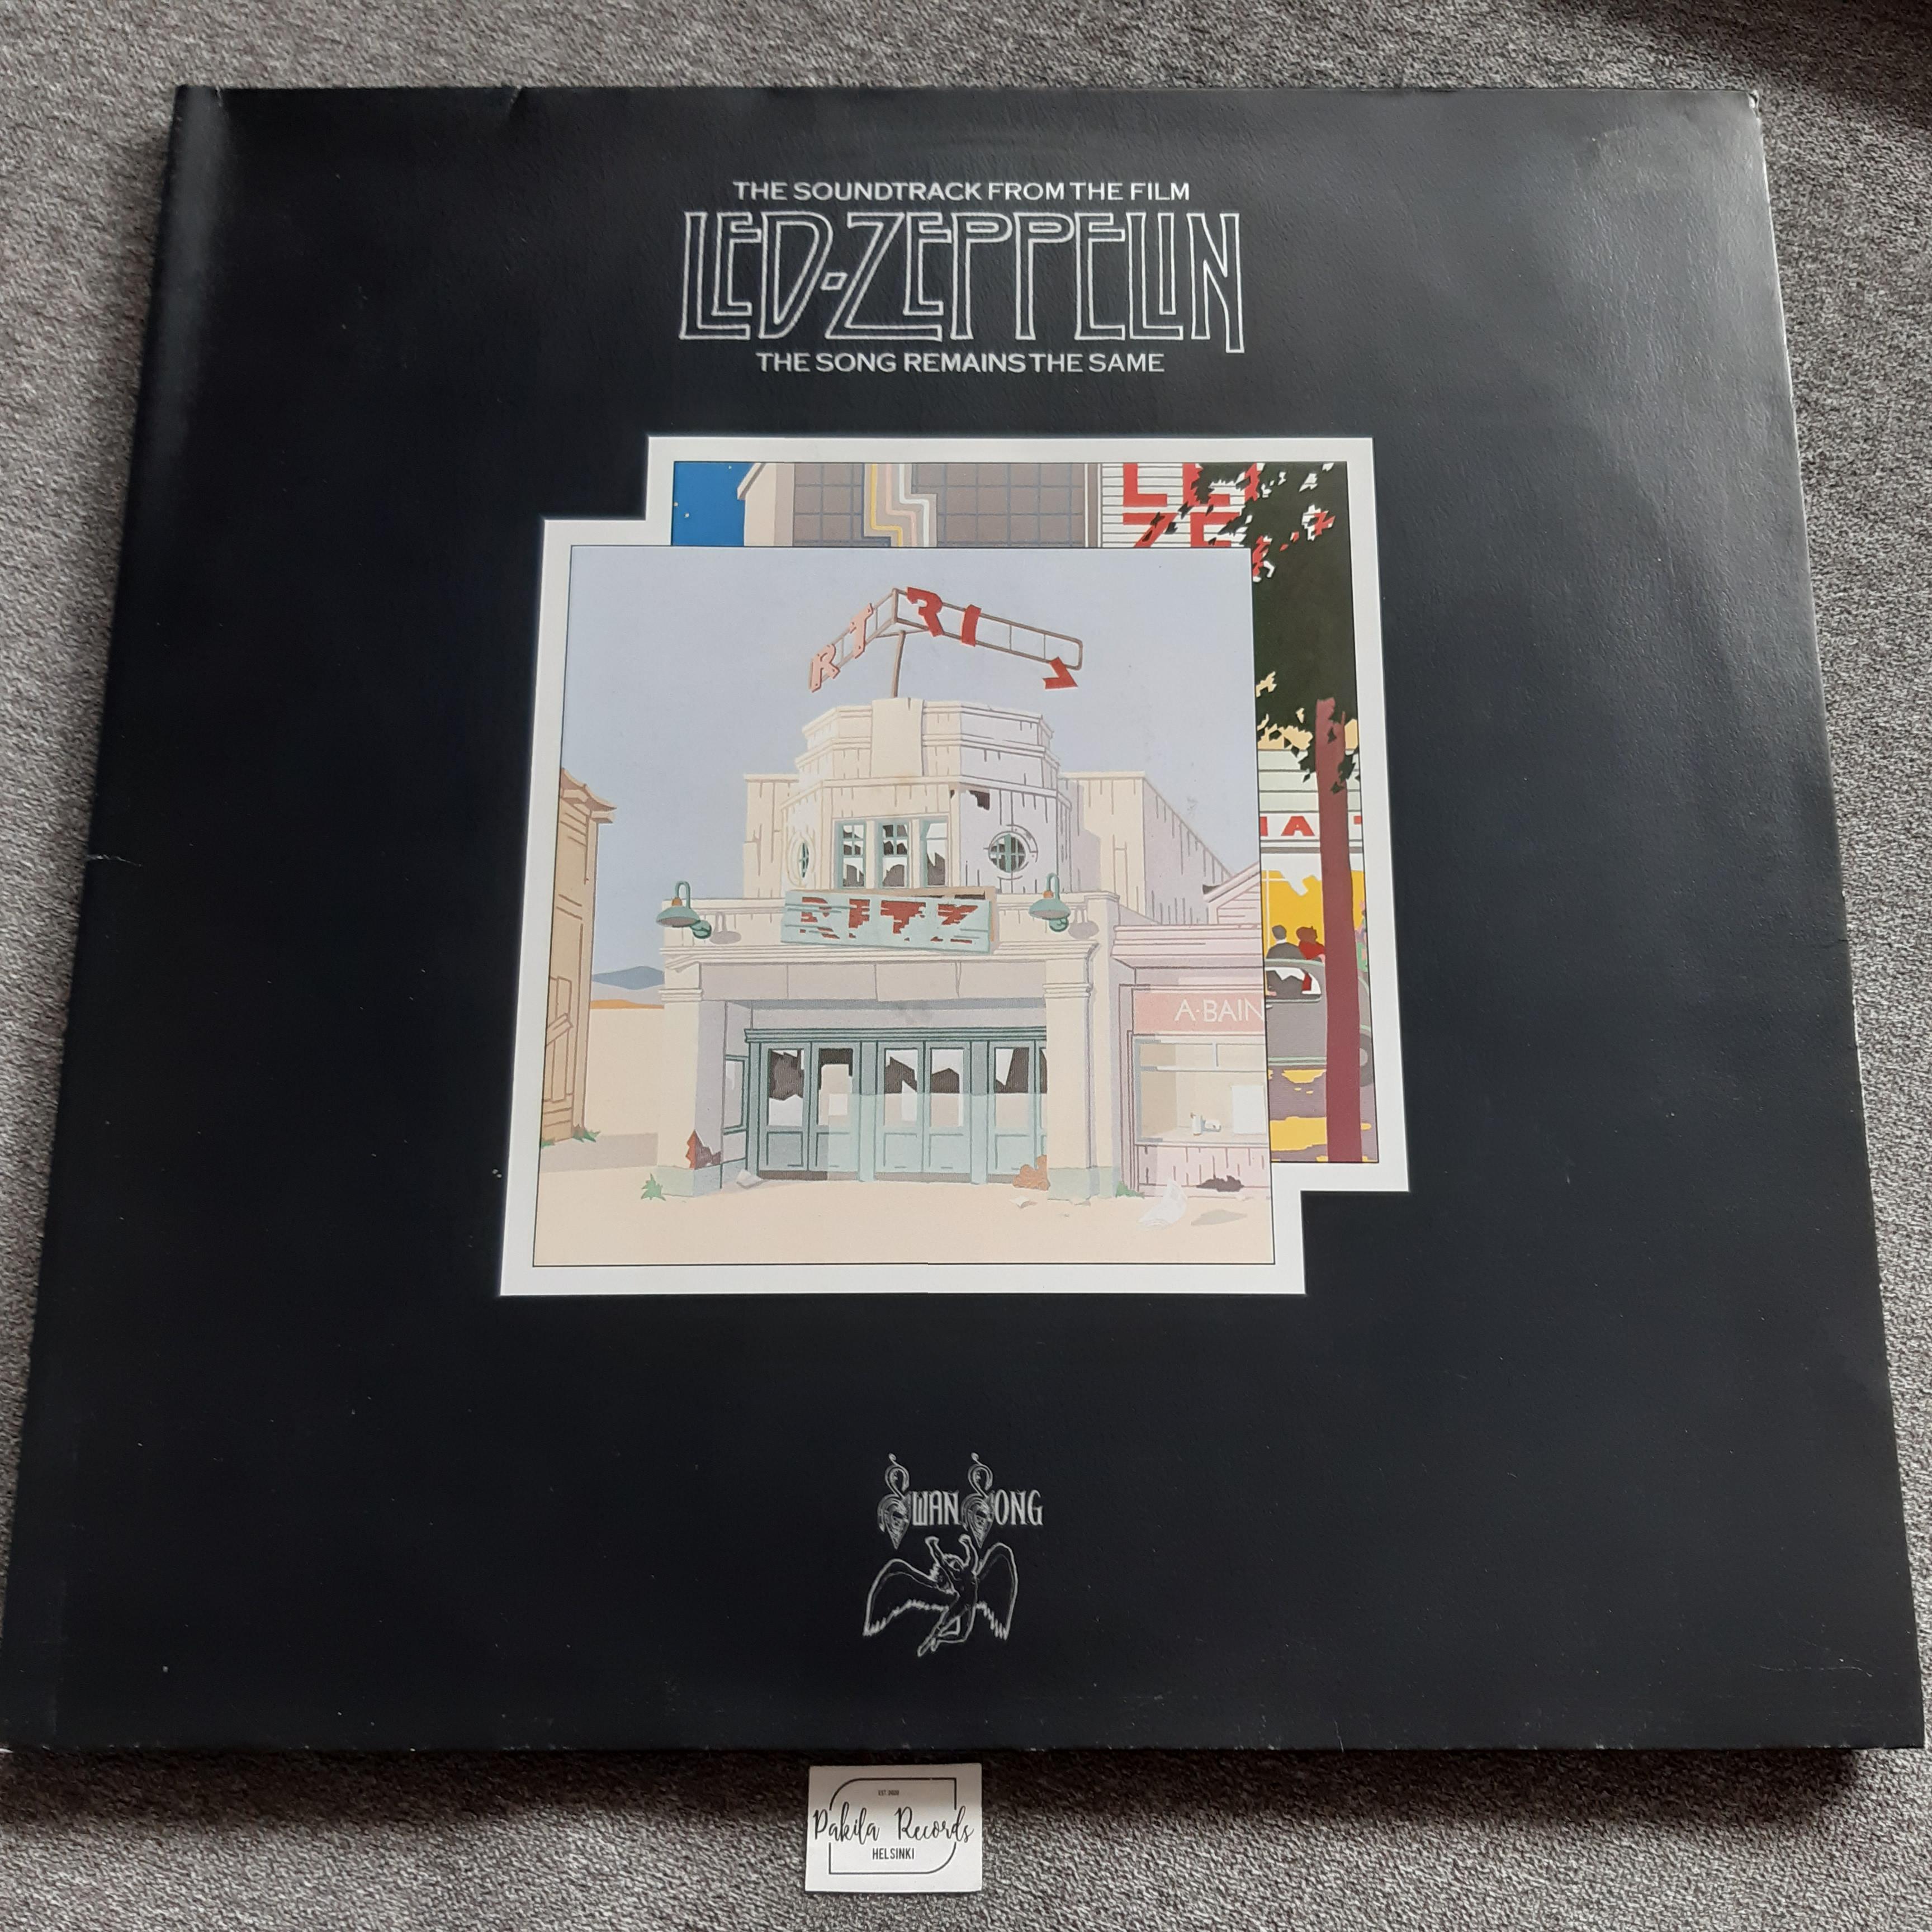 Led Zeppelin - The Soundtrack From The Film The Song Remains The Same - 2 LP (käytetty)